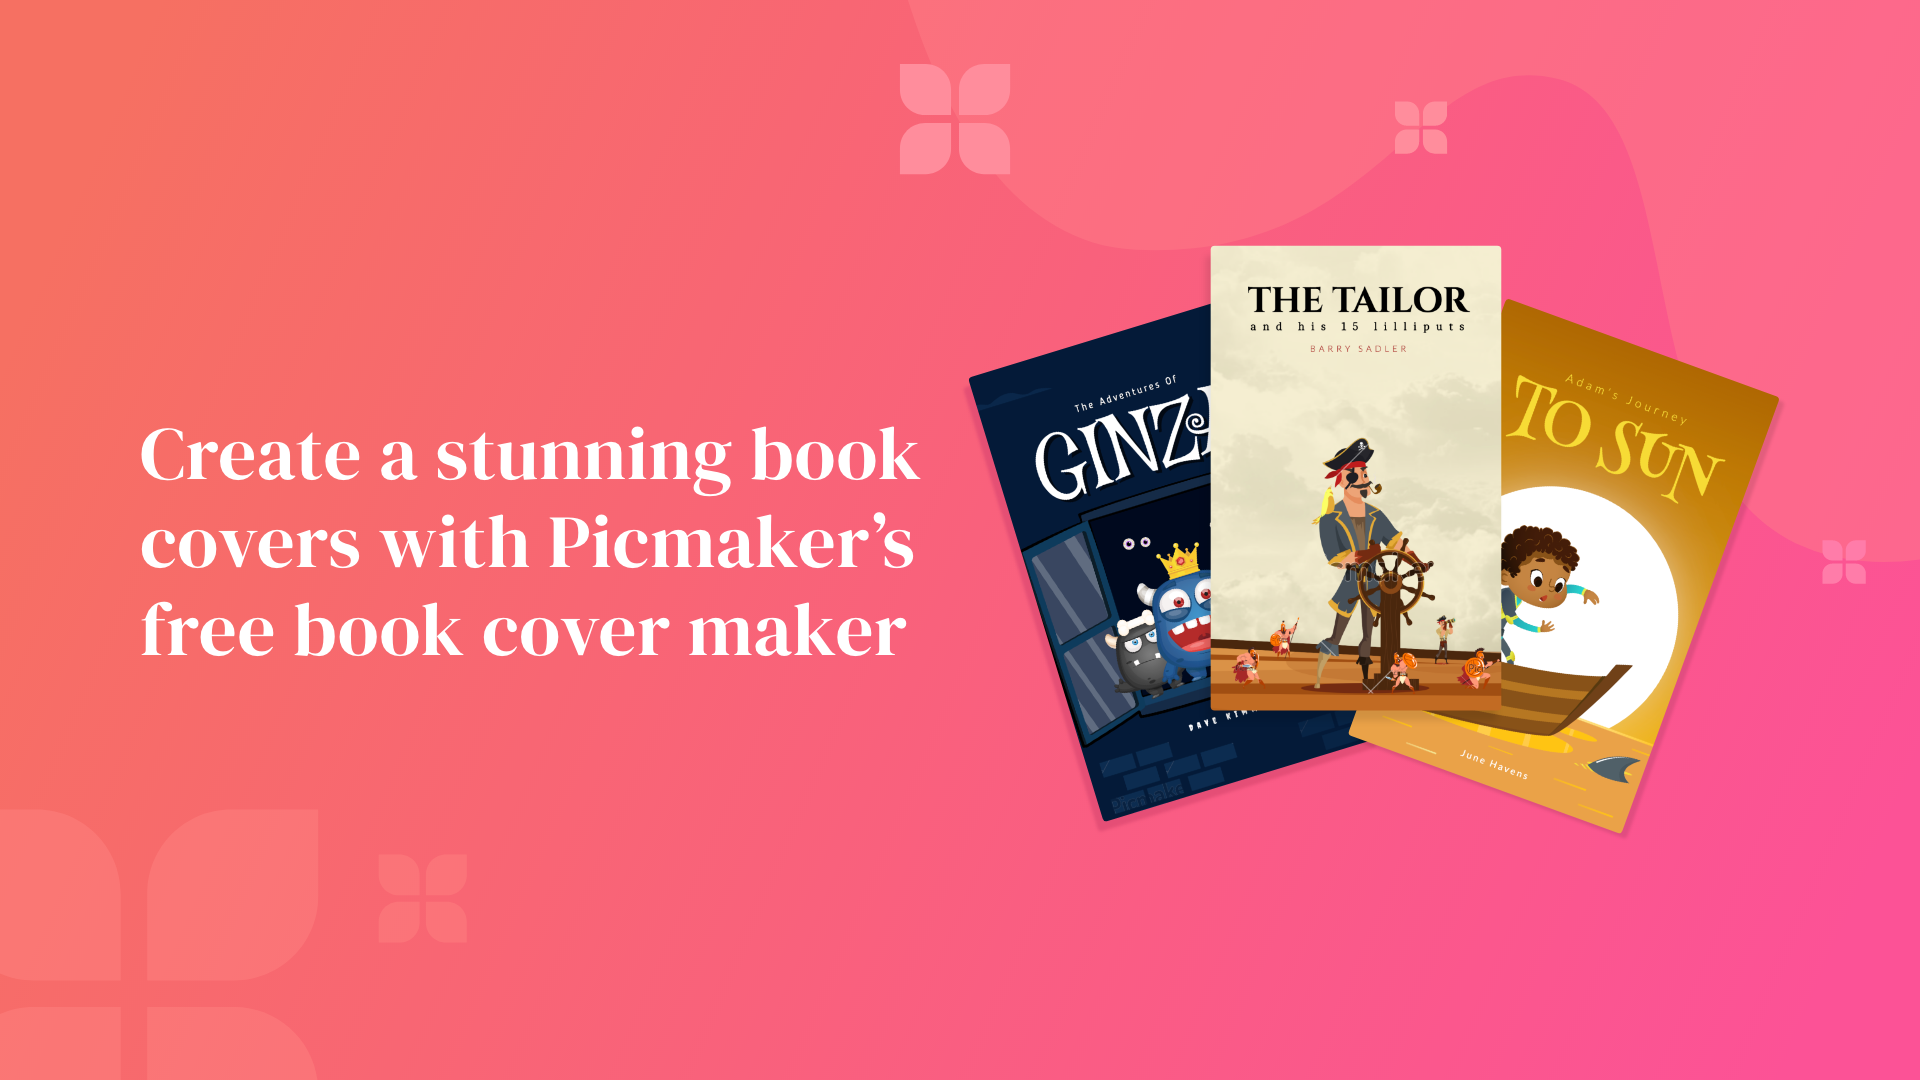 Free Online Book Cover Maker | Design Book Covers - Picmaker